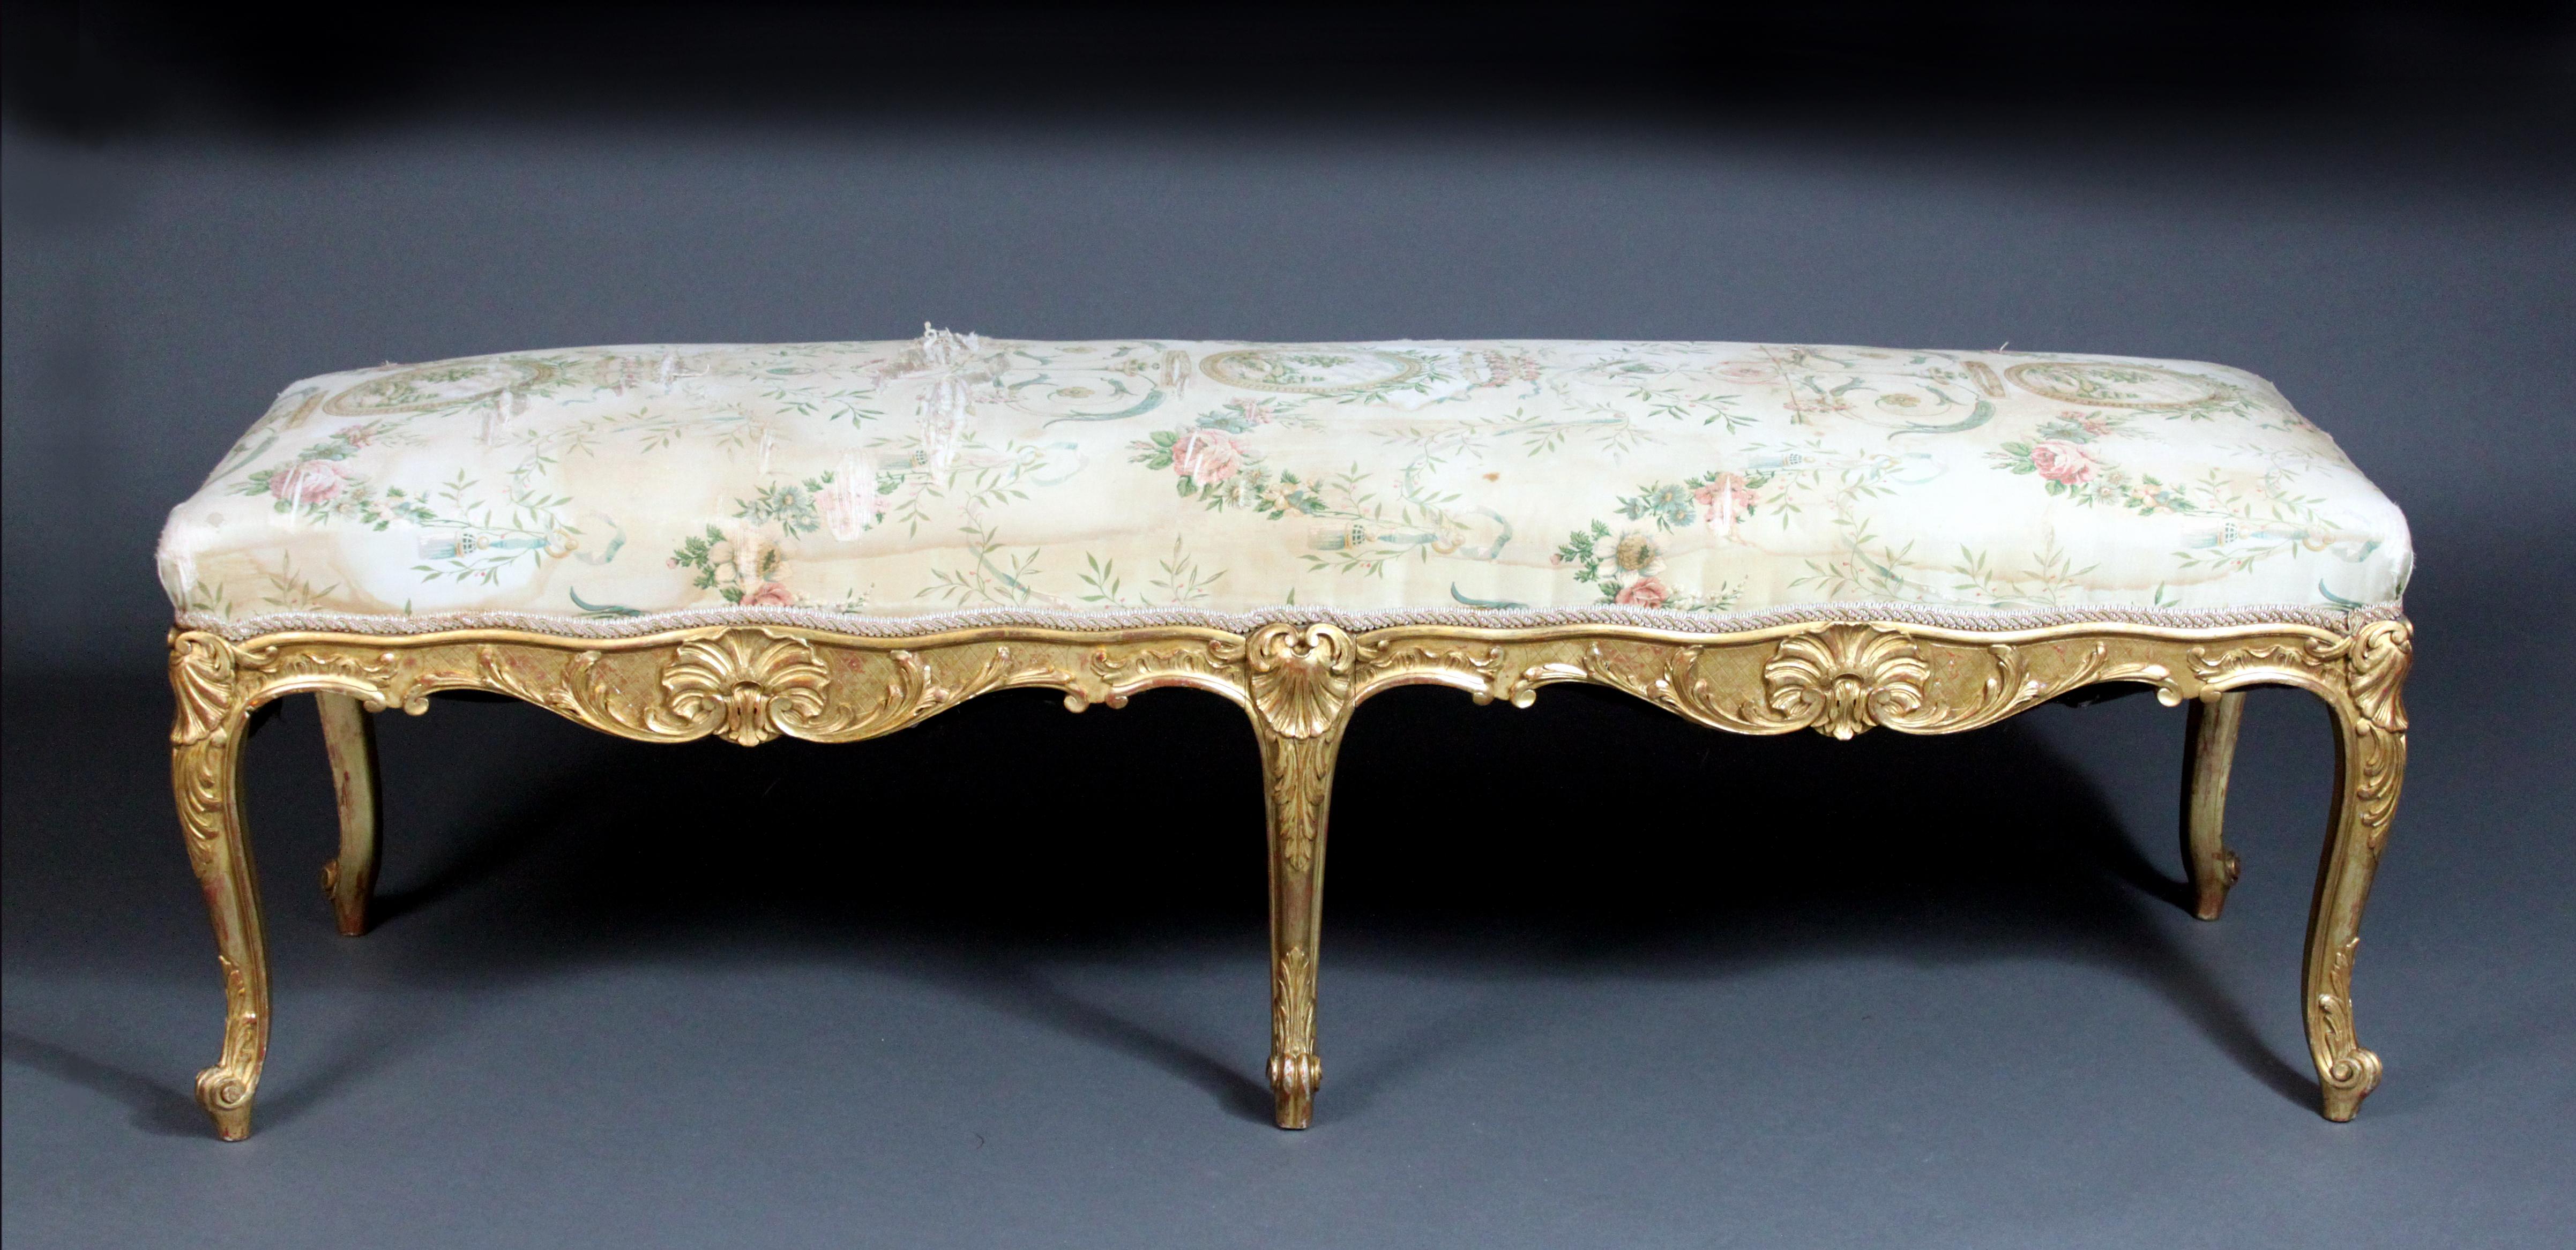 Louis XVI Style Giltwood Cabriole Leg Stool In Good Condition In Bradford-on-Avon, Wiltshire